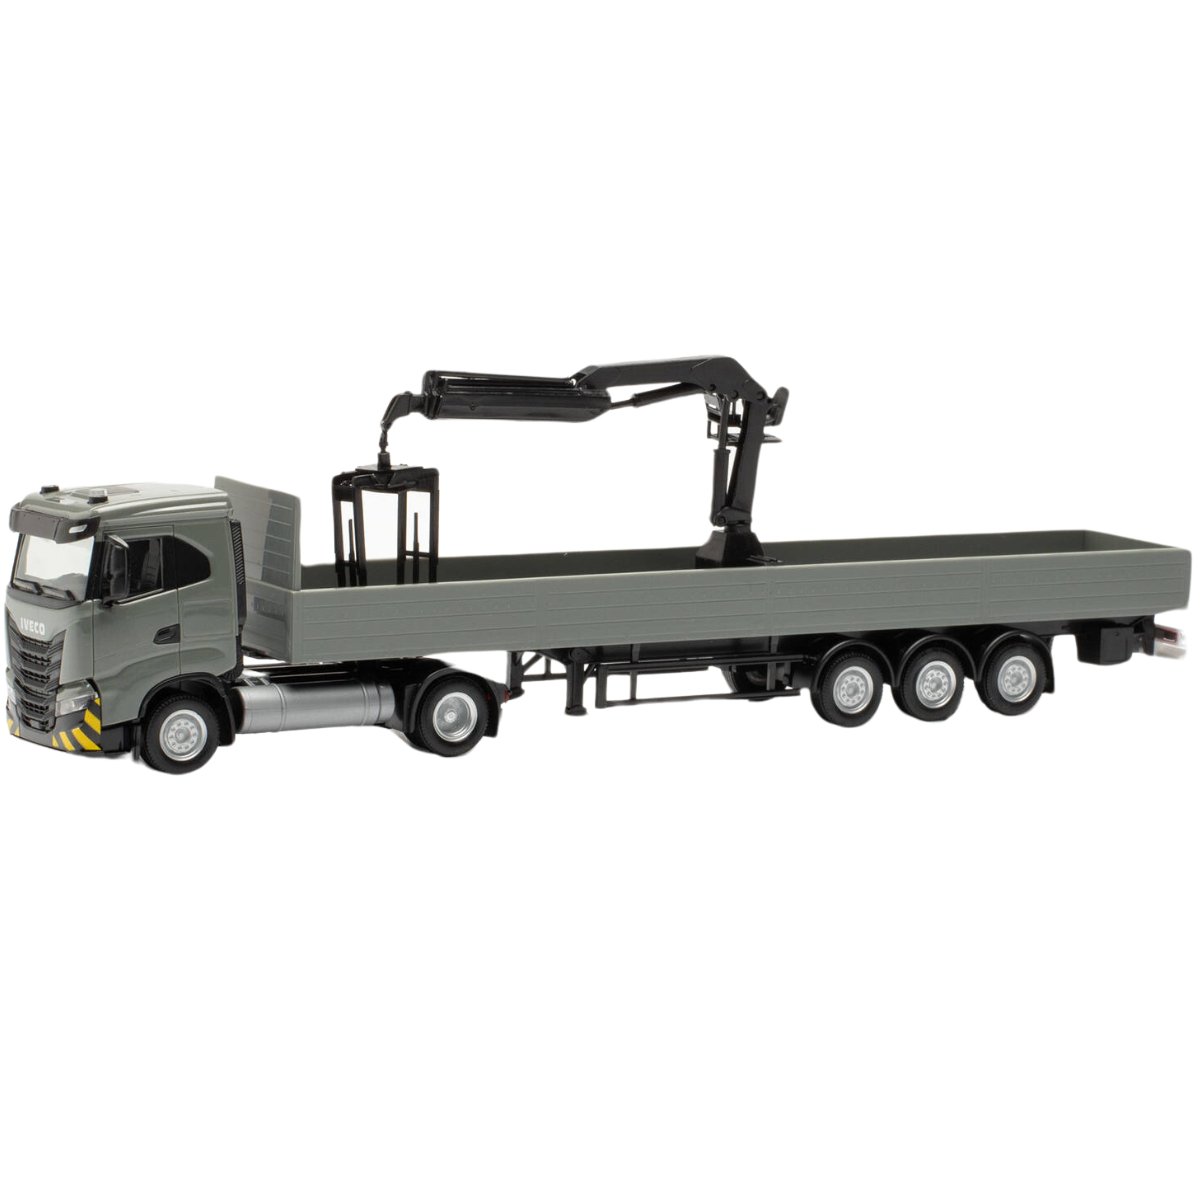 Herpa Iveco S - Way ND Flatbed Truck With Loading Crane - 1:87 Scale - Phillips Hobbies